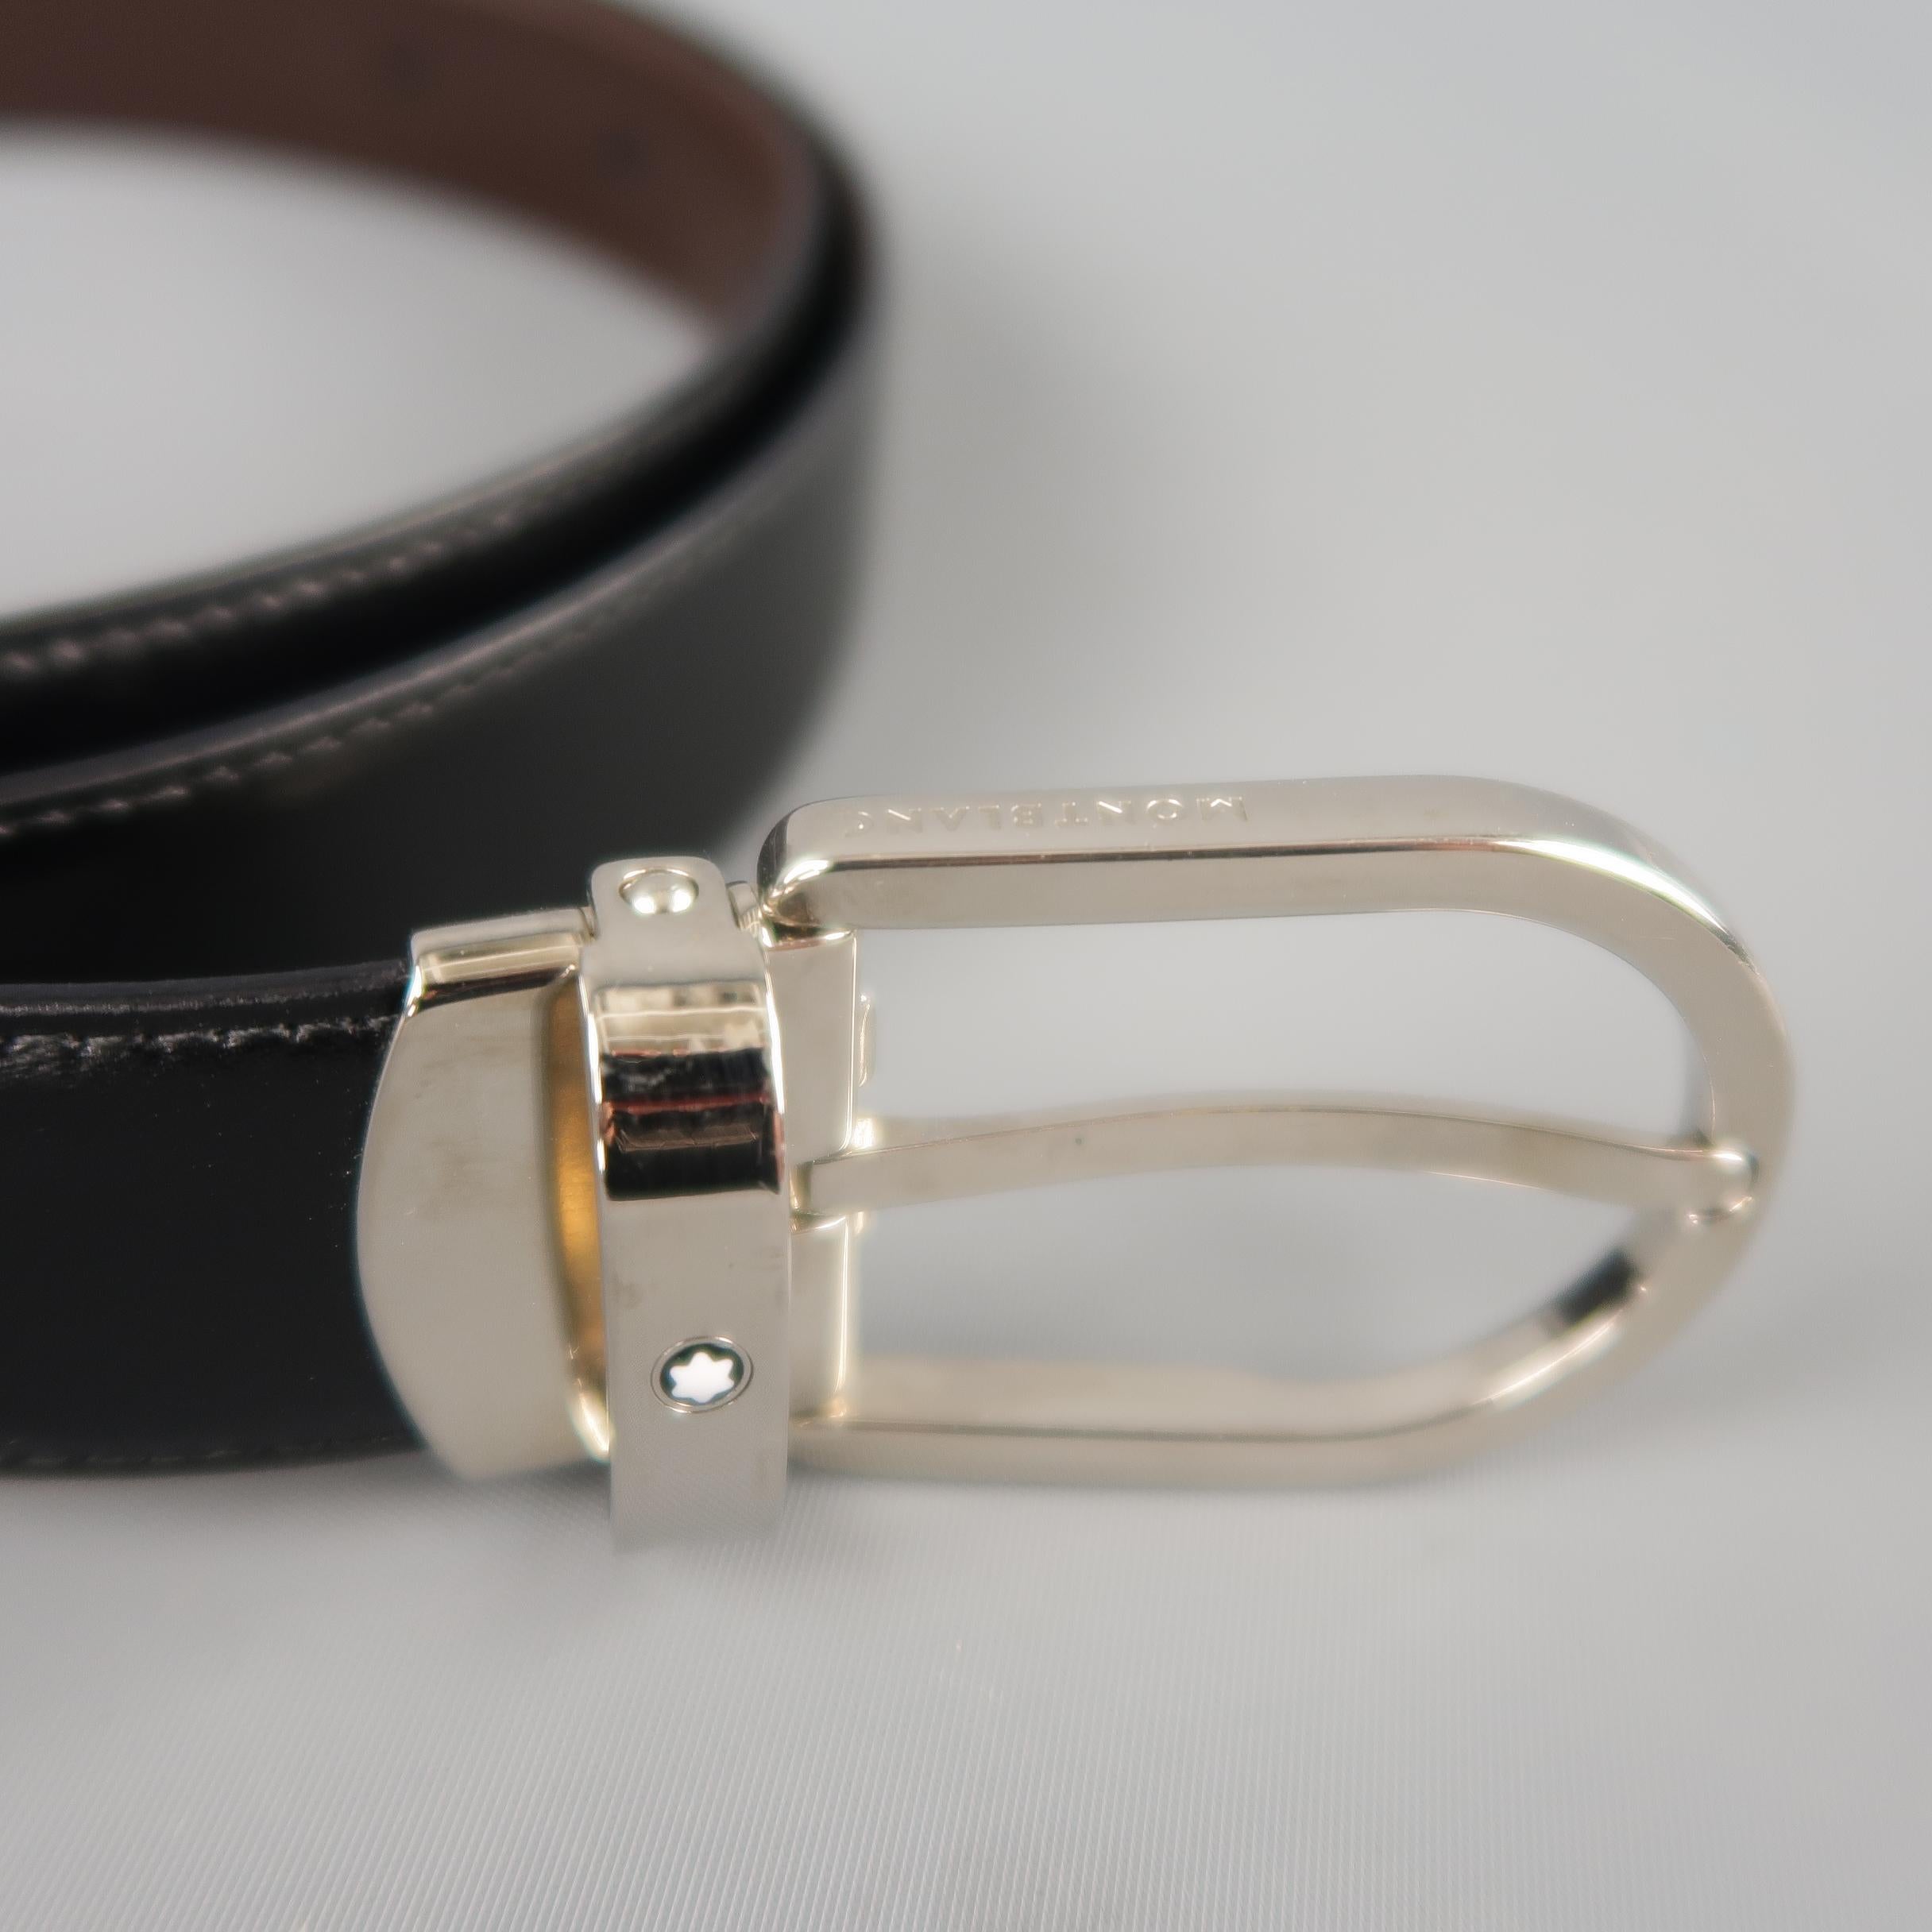 MONT BLANC dress belt features a dual tone brown and black reversible leather strap with a silver tone D shaped buckle. Minor wear on buckle. Made in Italy.
 
Good Pre-Owned Condition.
Marked: (no size)
 
Length: 47 in.
Width: 1 in.
Fits: 38.5 -